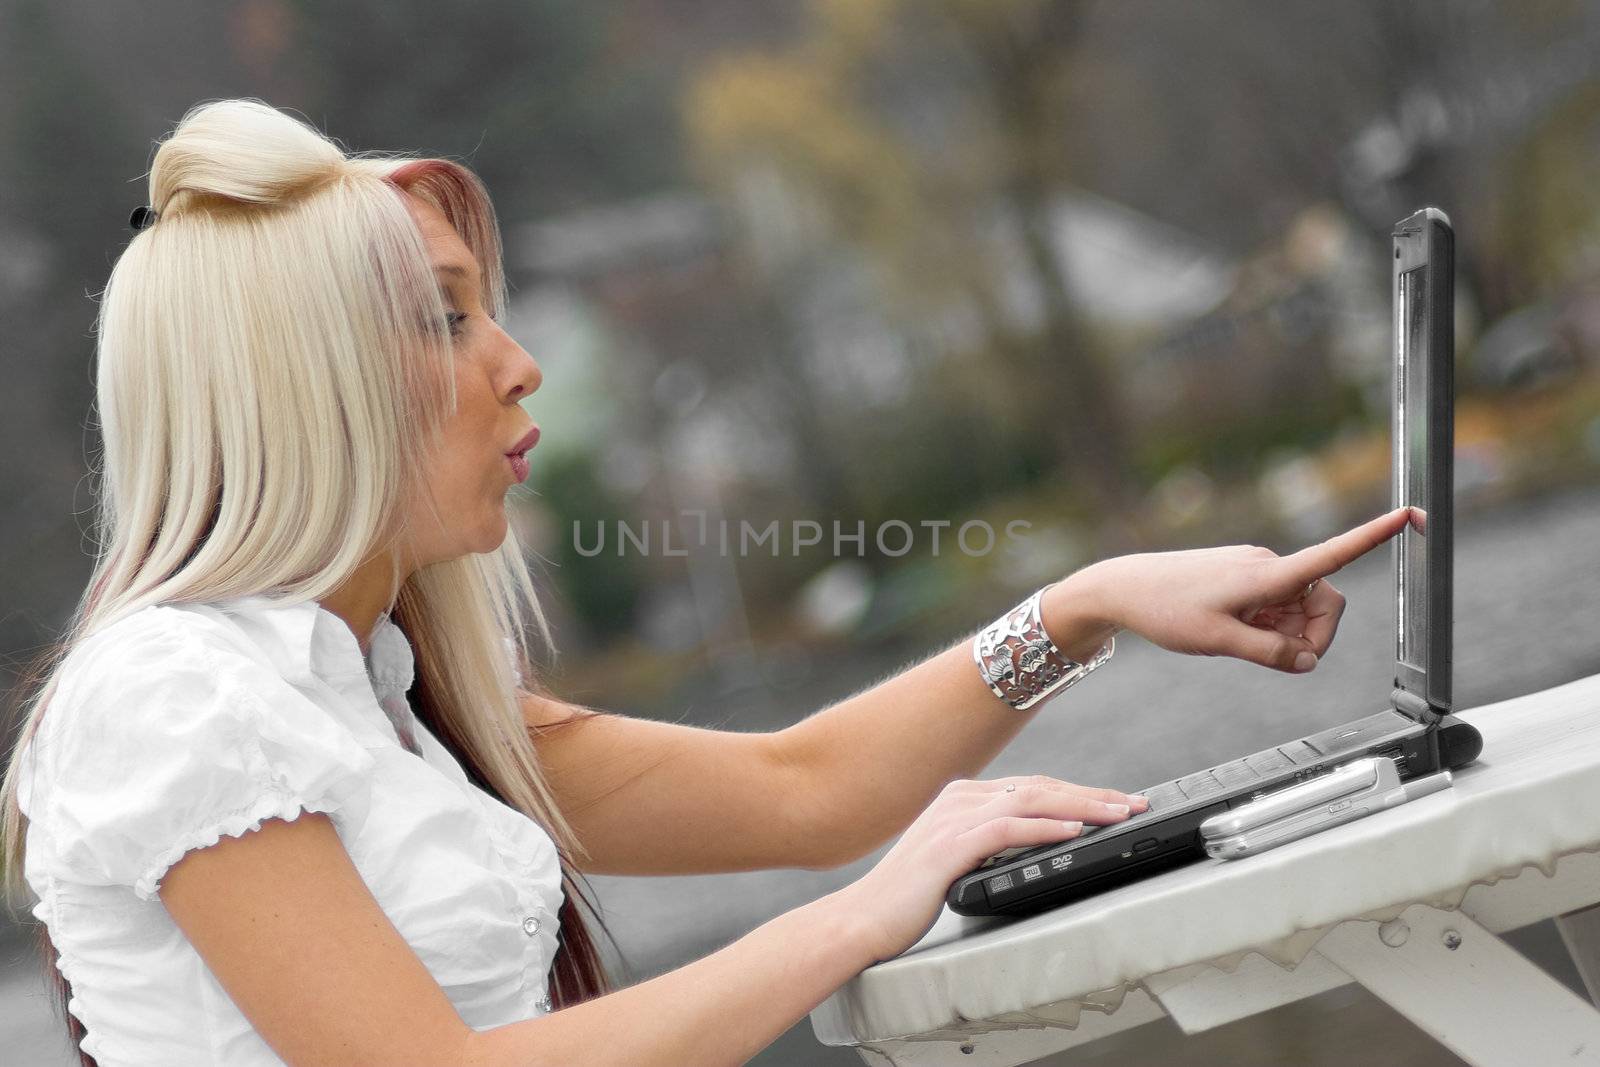 A beautiful young blonde woman points to her laptop screen in amazement.  It looks as if she is seeing something offensive.